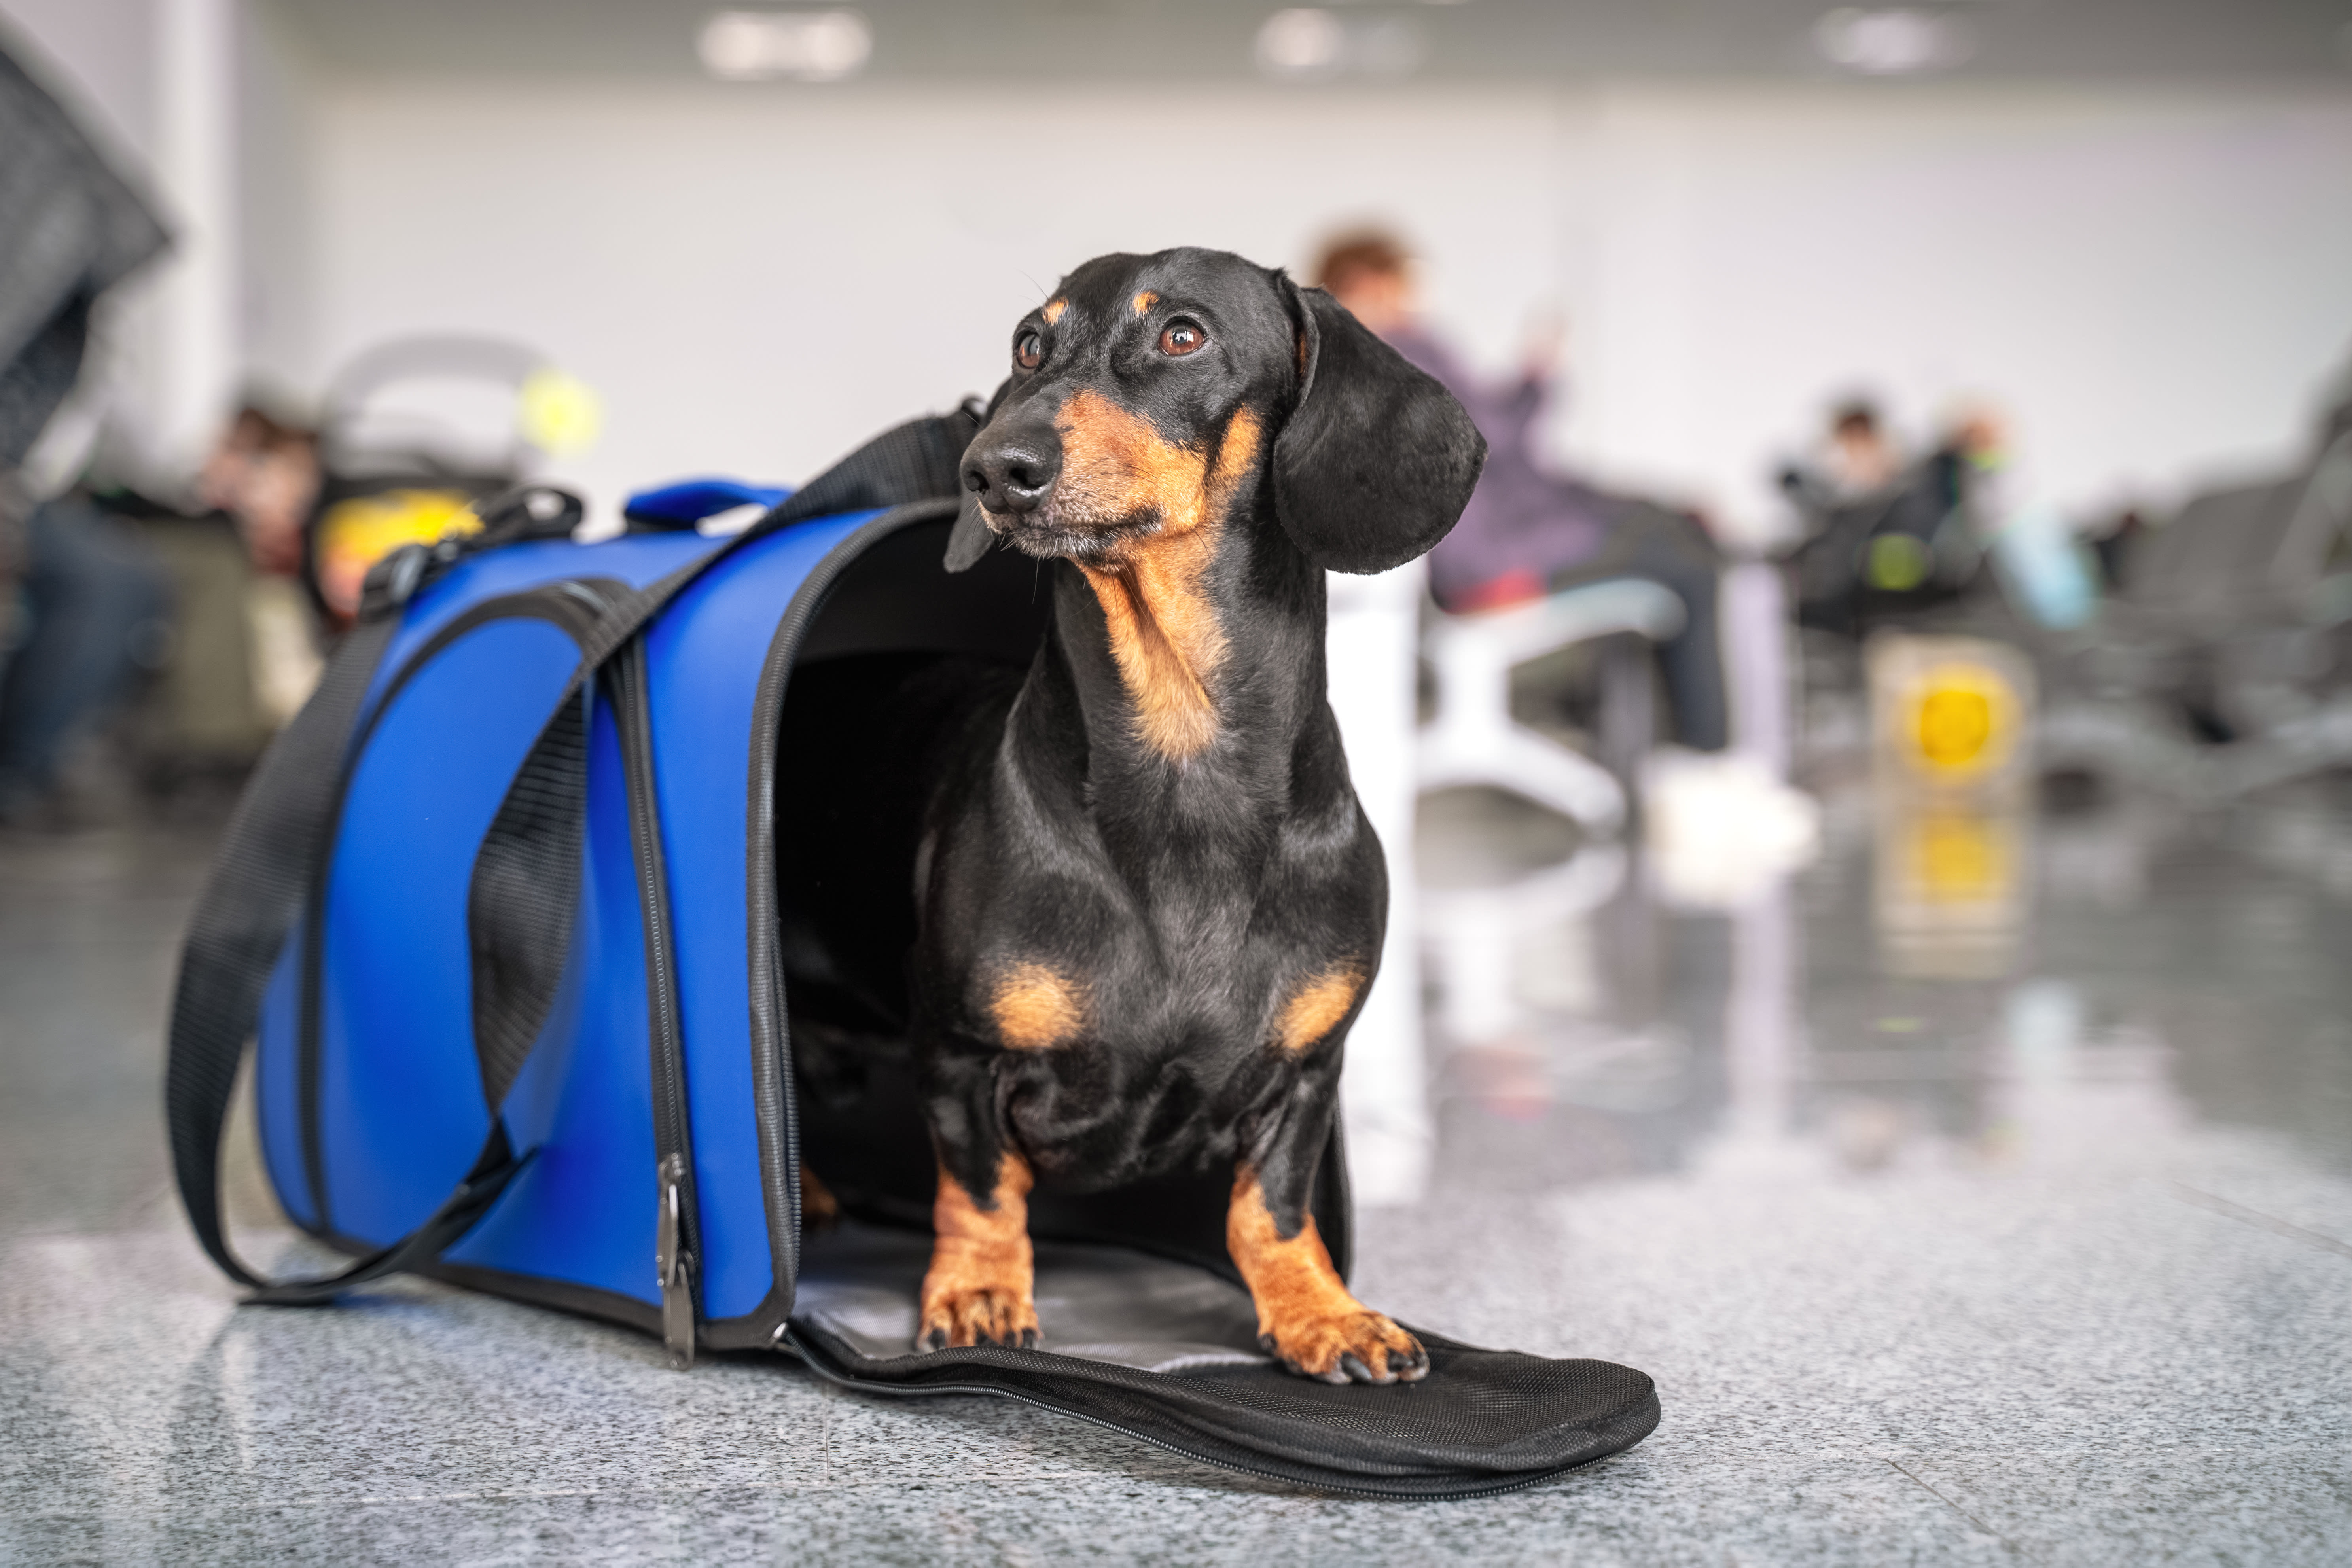 How to Choose the Best Carrier for Your Dog